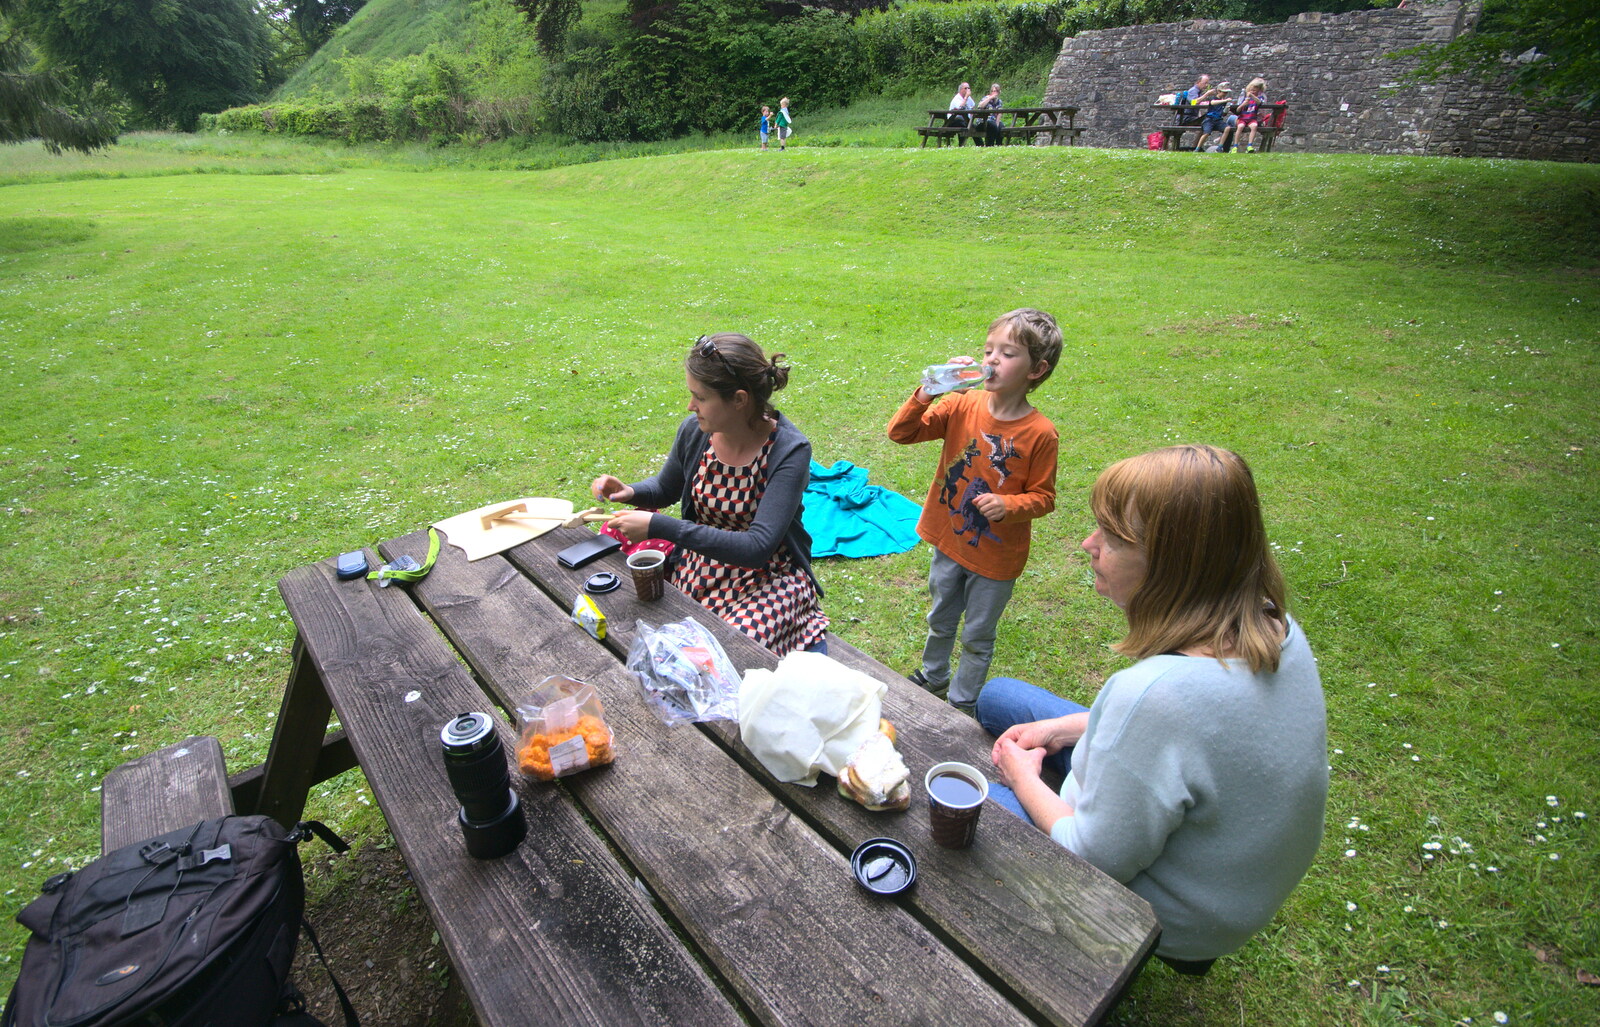 Time for a picnic on the bench from A Visit to Okehampton Castle and Dartmoor, Devon  - 28th May 2016